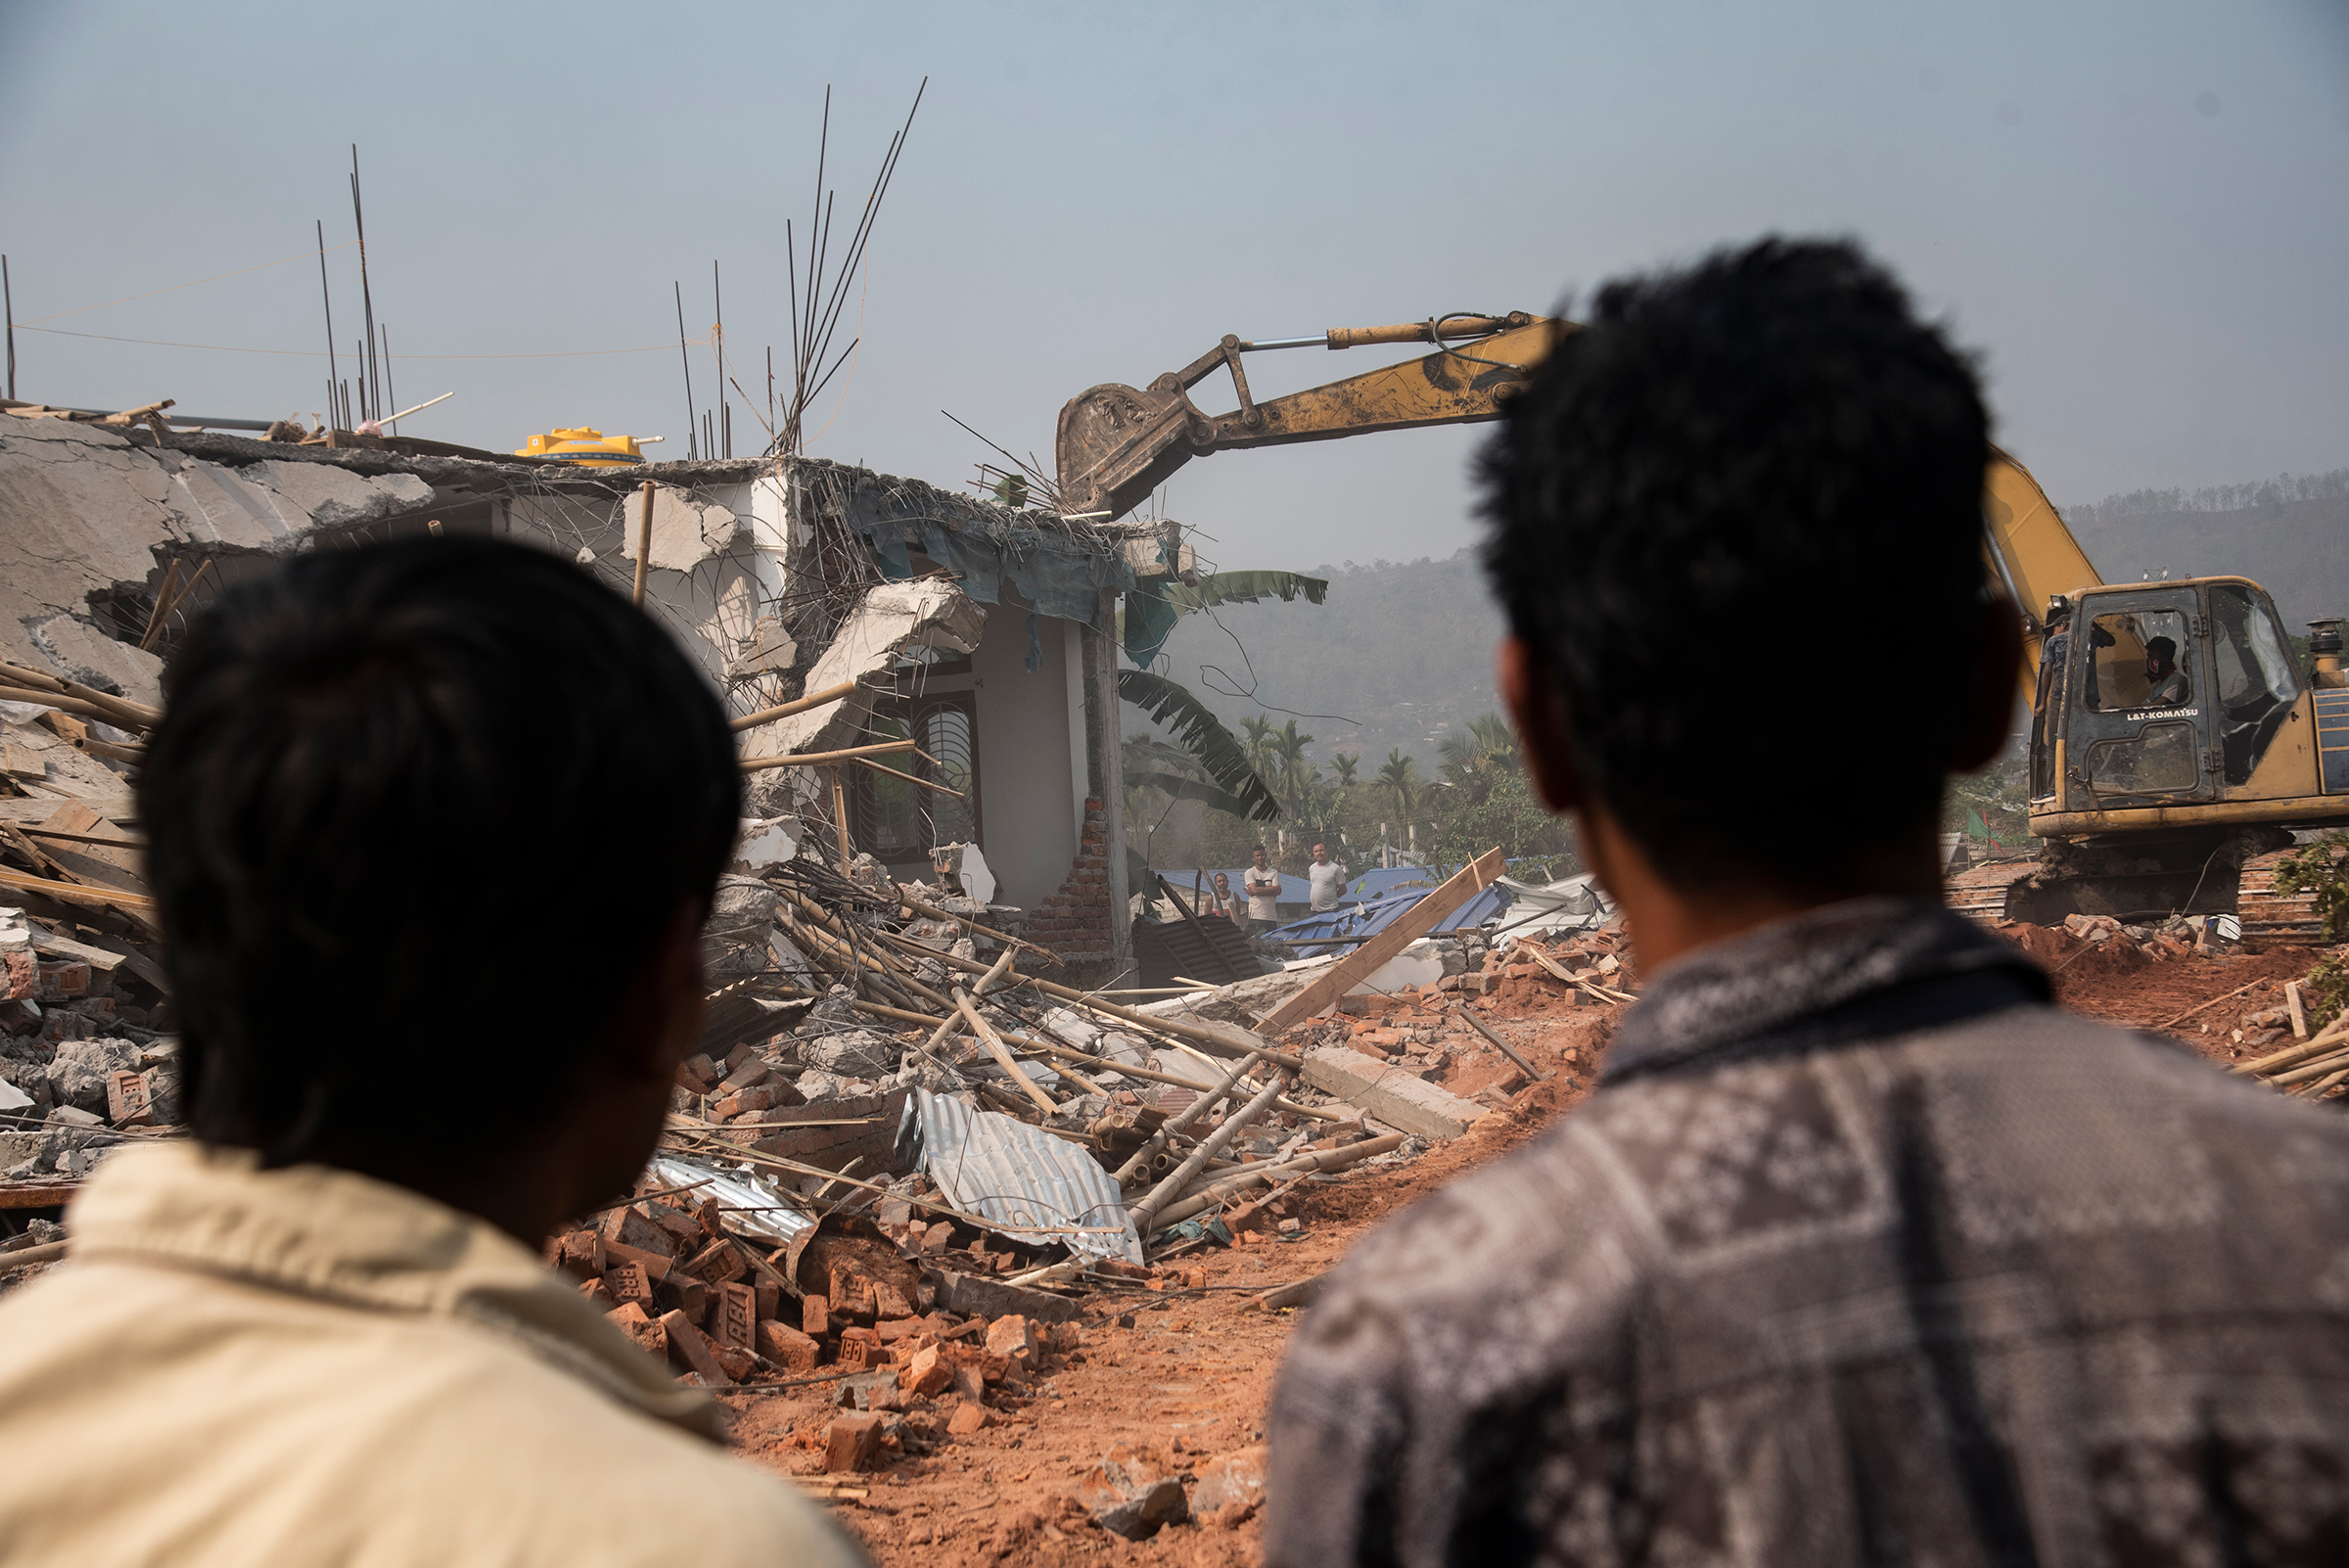 A bulldozer being used to demolish alleged illegal structures during an anti-encroachment eviction drive by Guwahati Metropolitan Development Authority, on Feb. 27 in Guwahati, India.